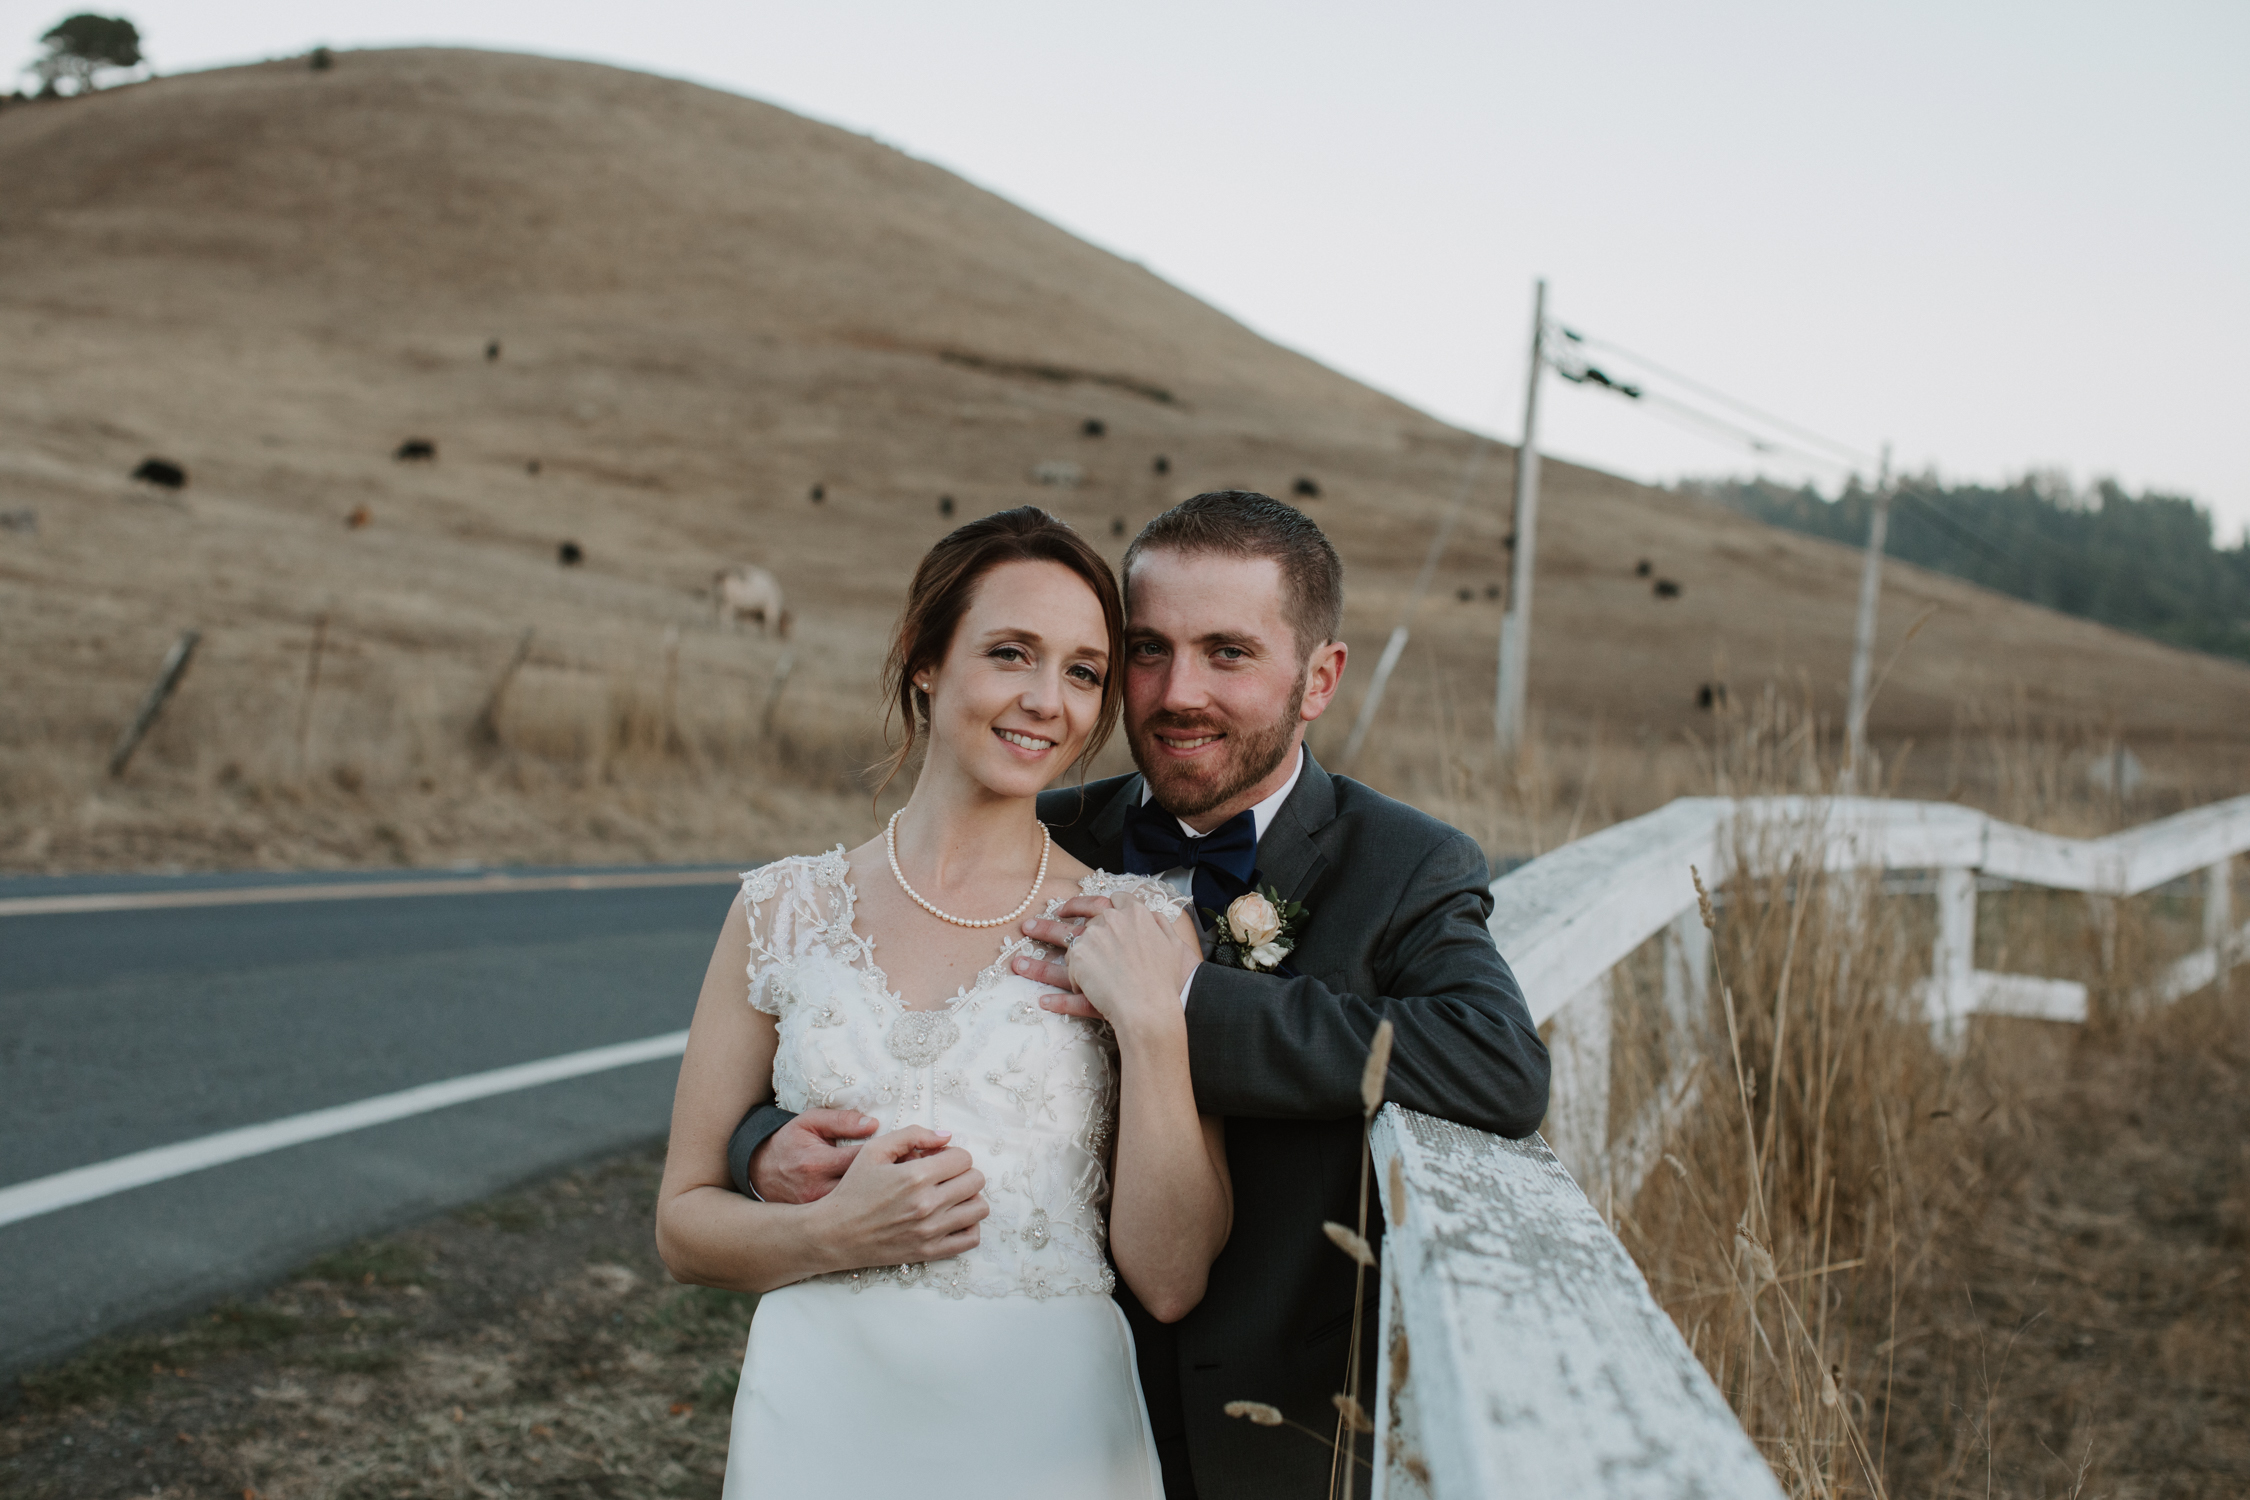 Rancho Nicasio wedding portraits by amy thompson photography